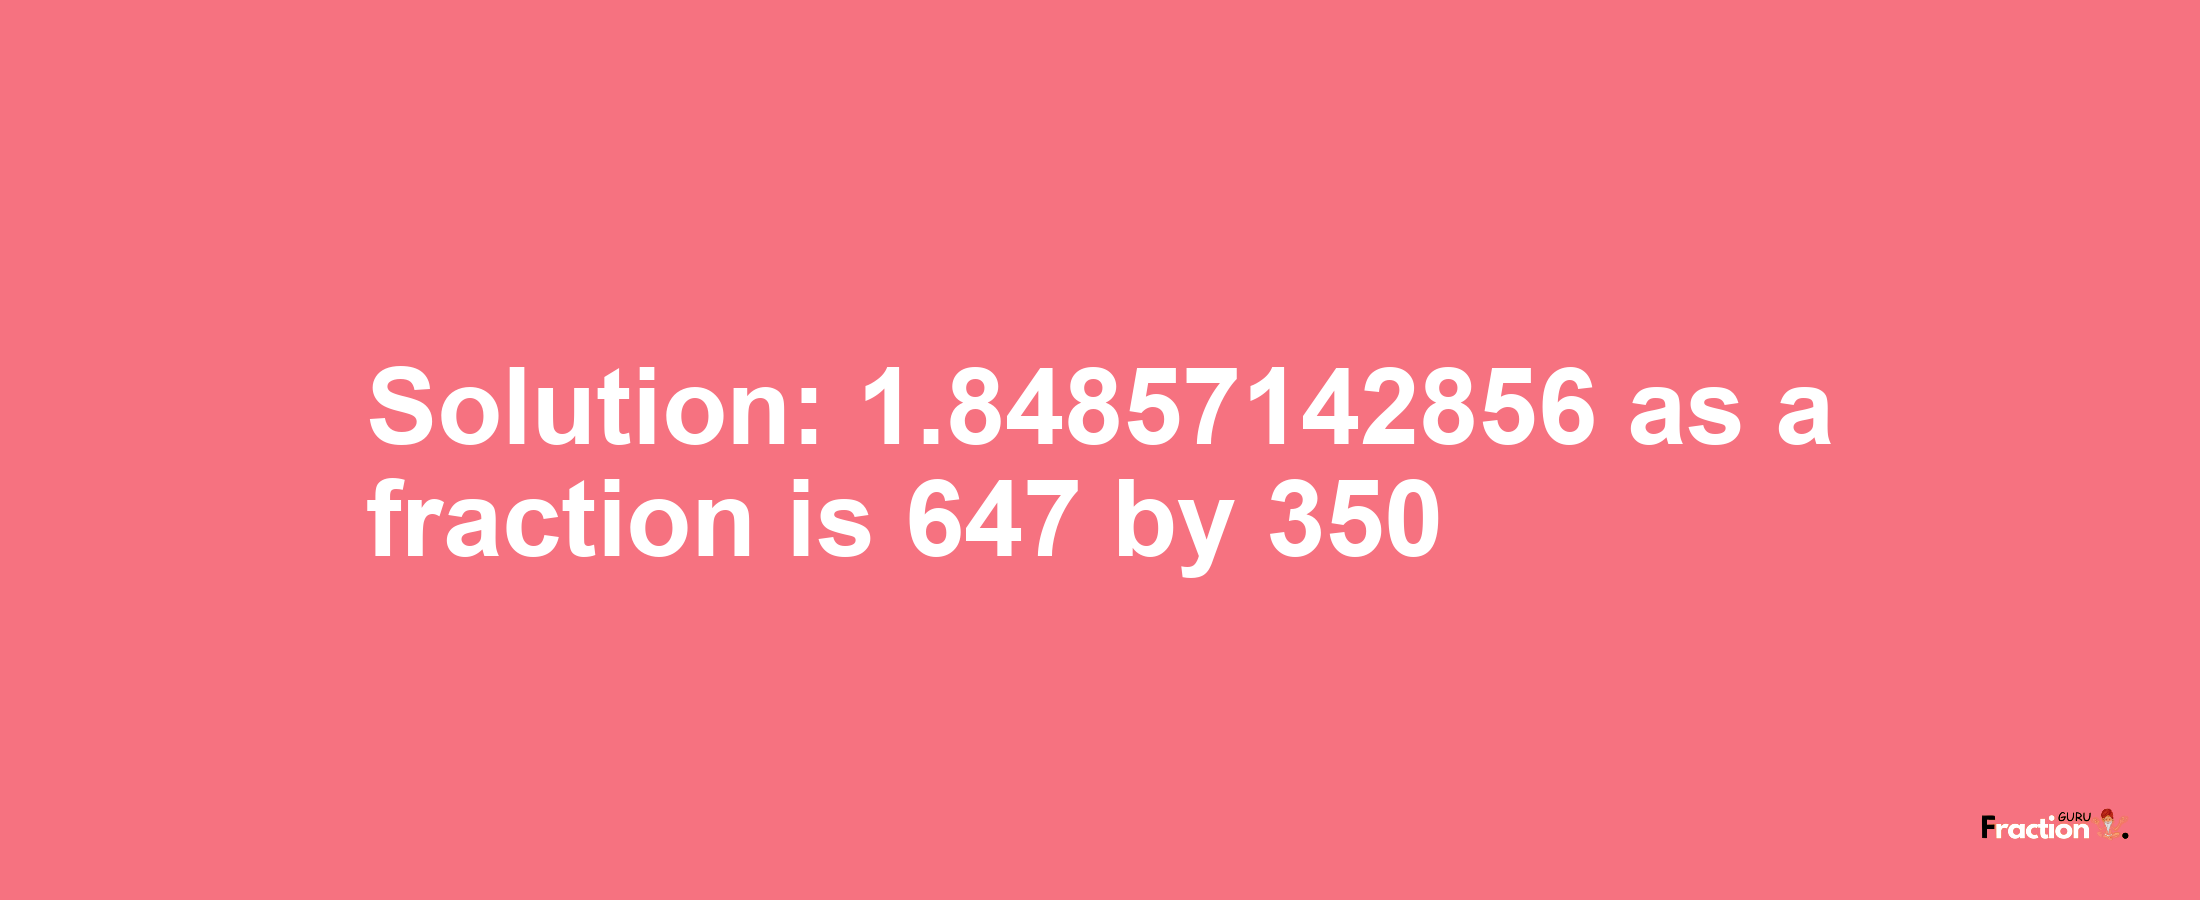 Solution:1.84857142856 as a fraction is 647/350